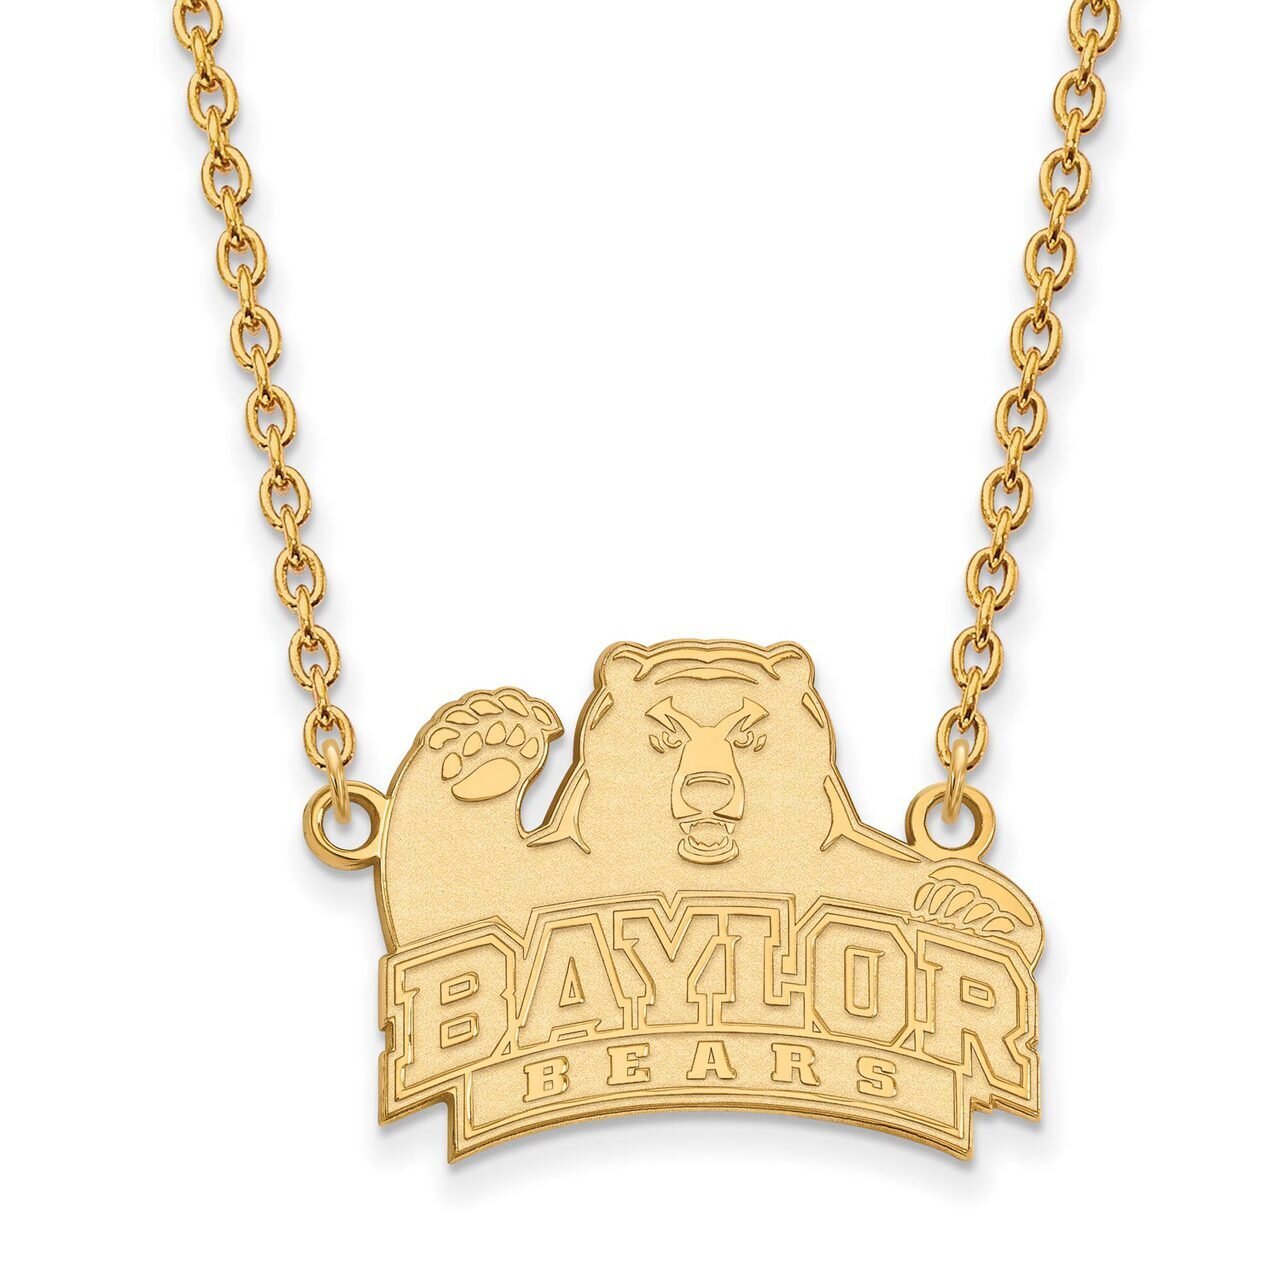 Baylor University Large Pendant with Chain Necklace Gold-plated Silver GP014BU-18